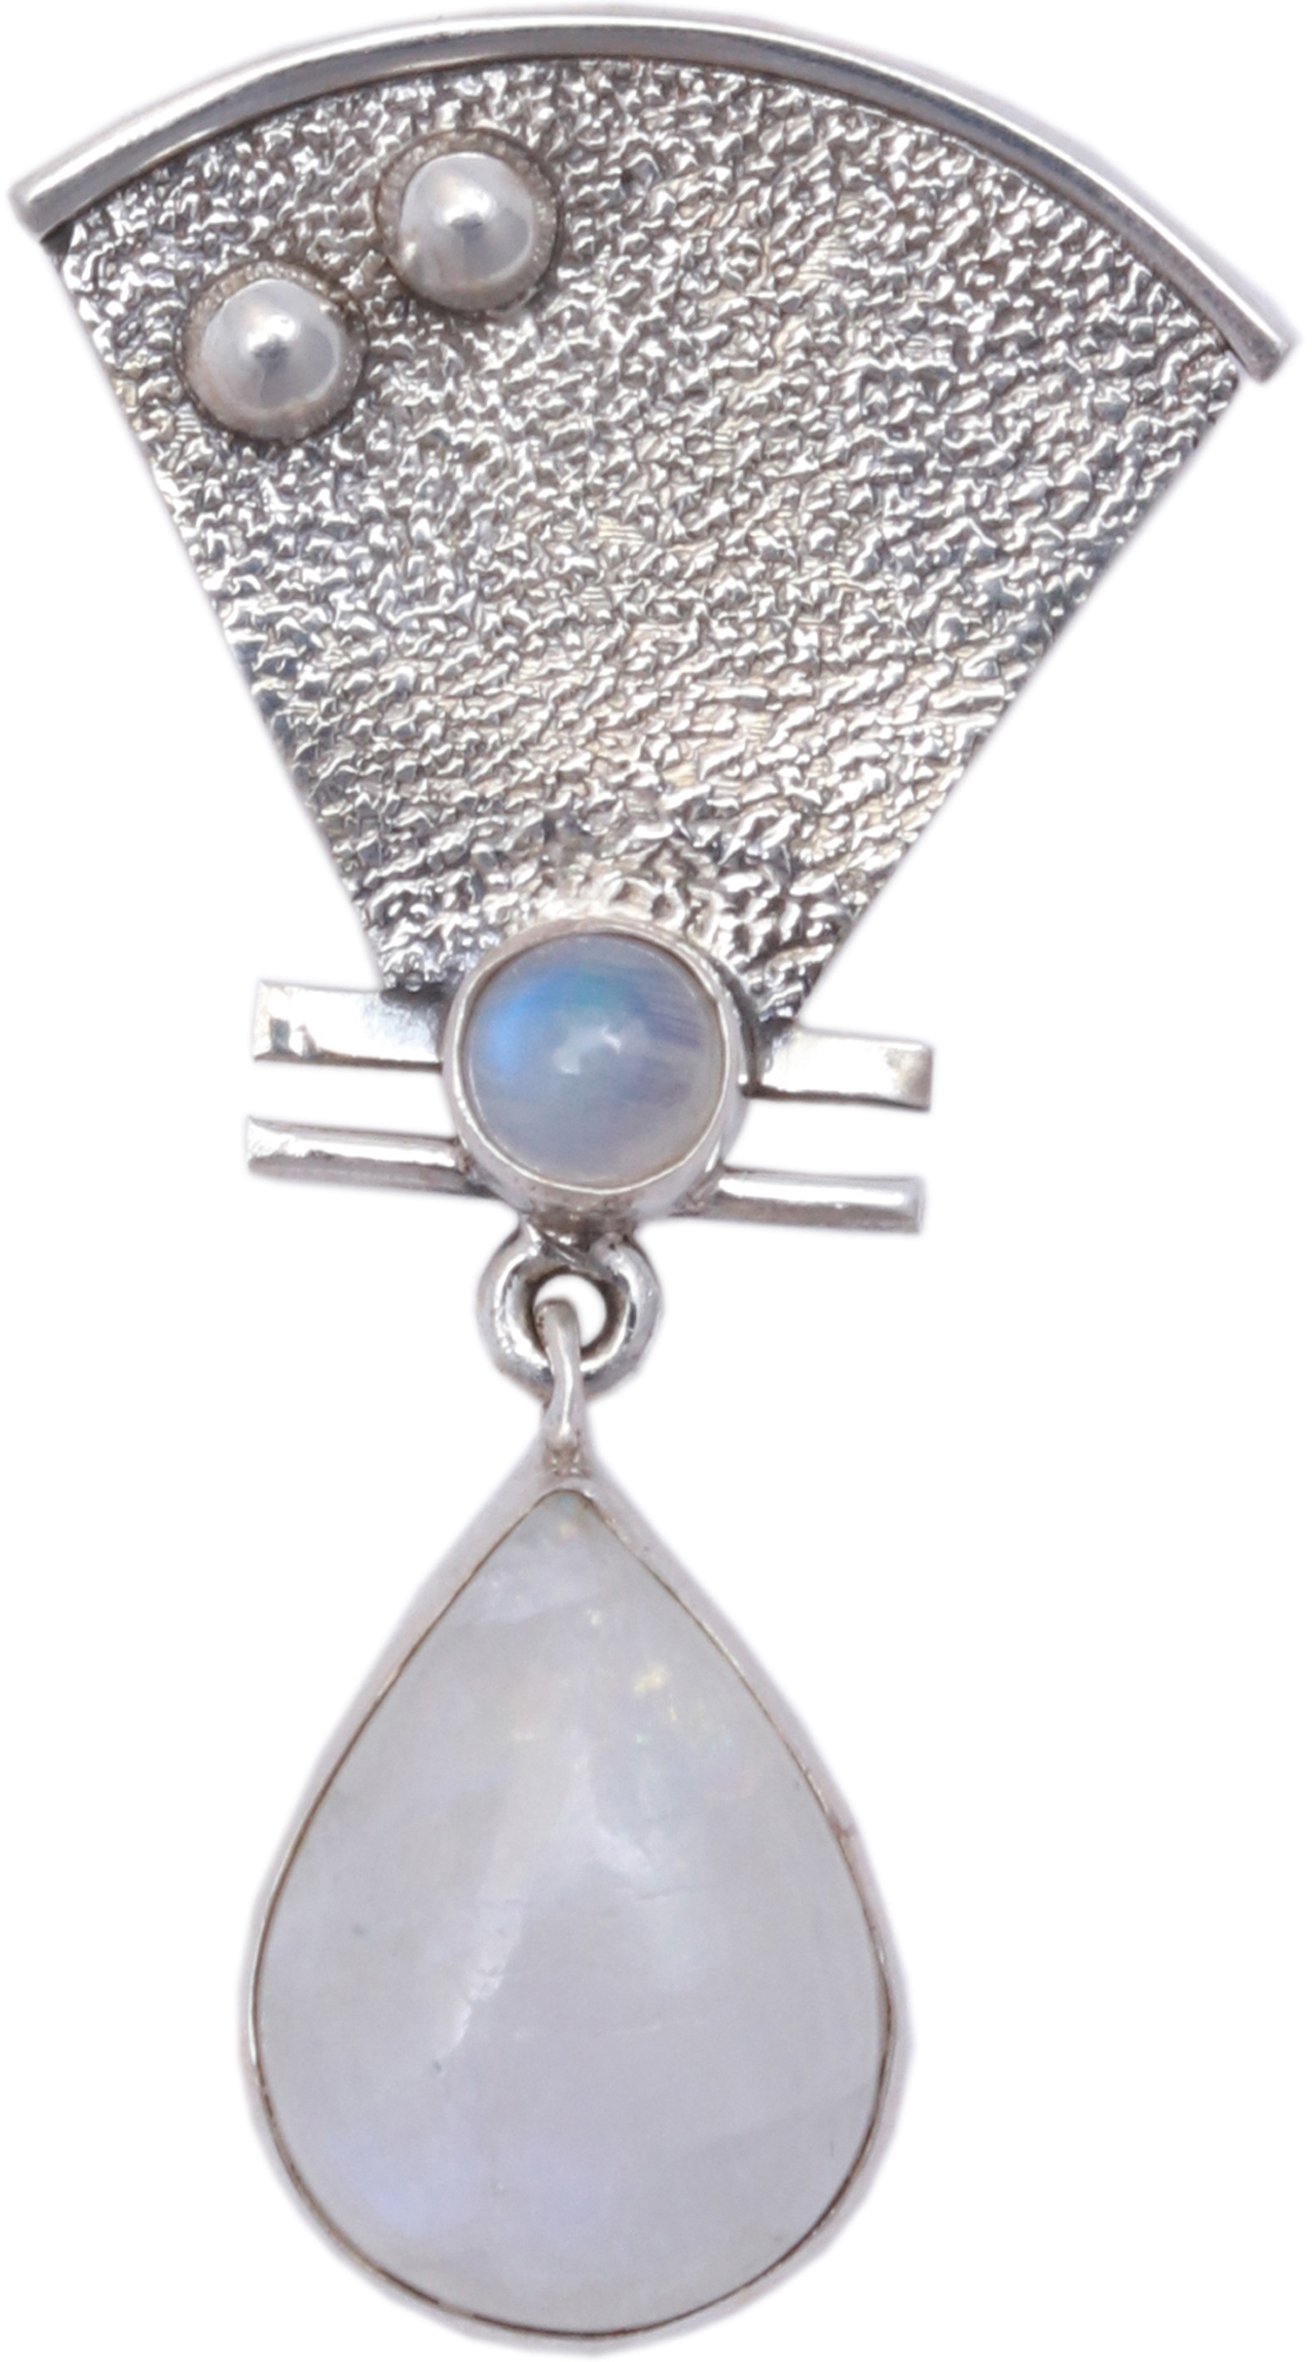 Tear-Drop Moonstone Embellished Pendant with Triangular Spacer